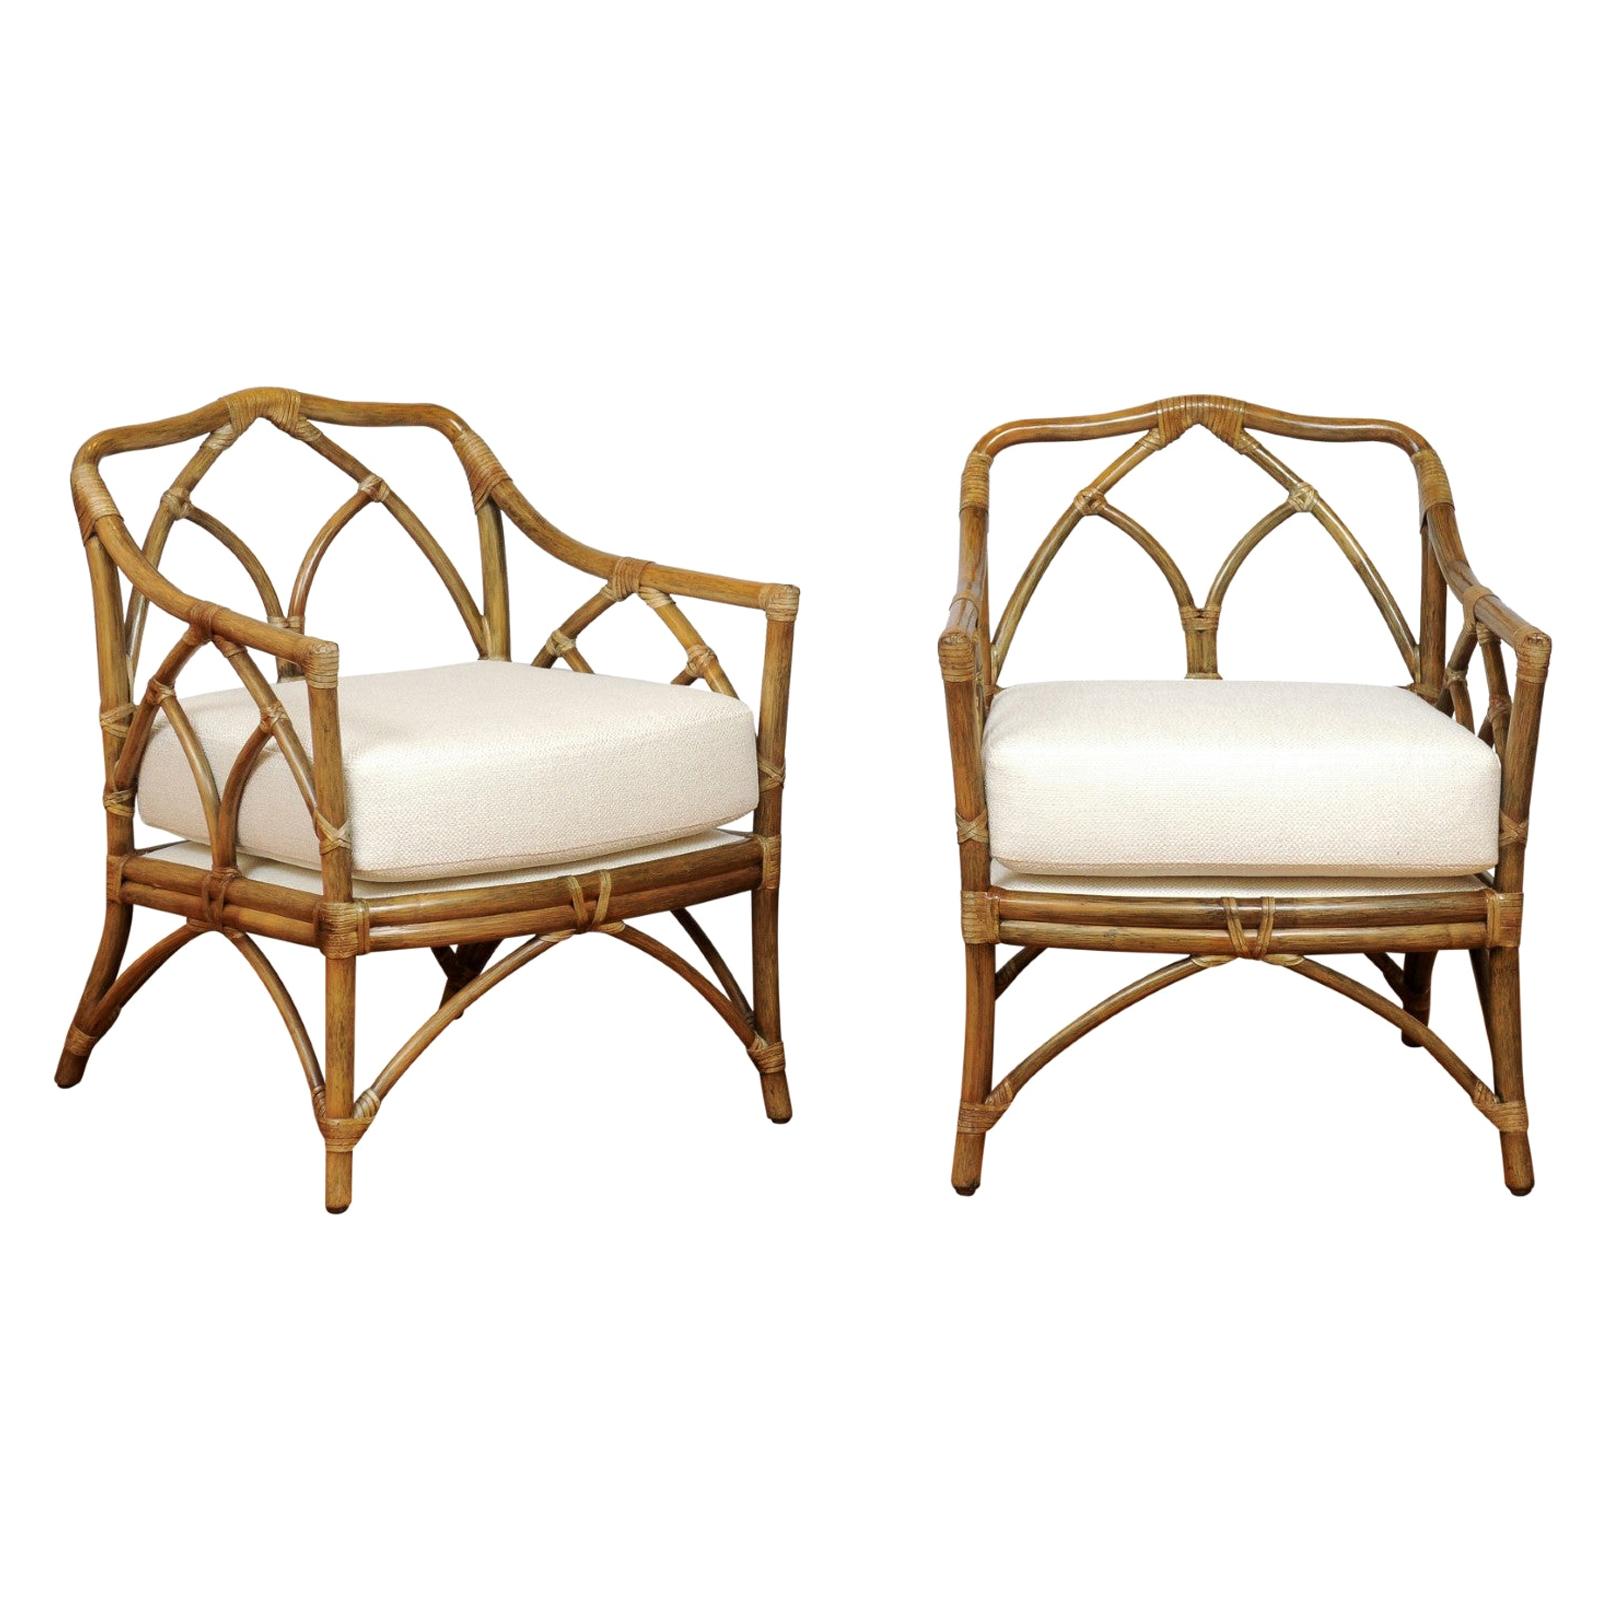 Chic Restored Pair Modern Cathedral Back Loungers by McGuire, circa 1975